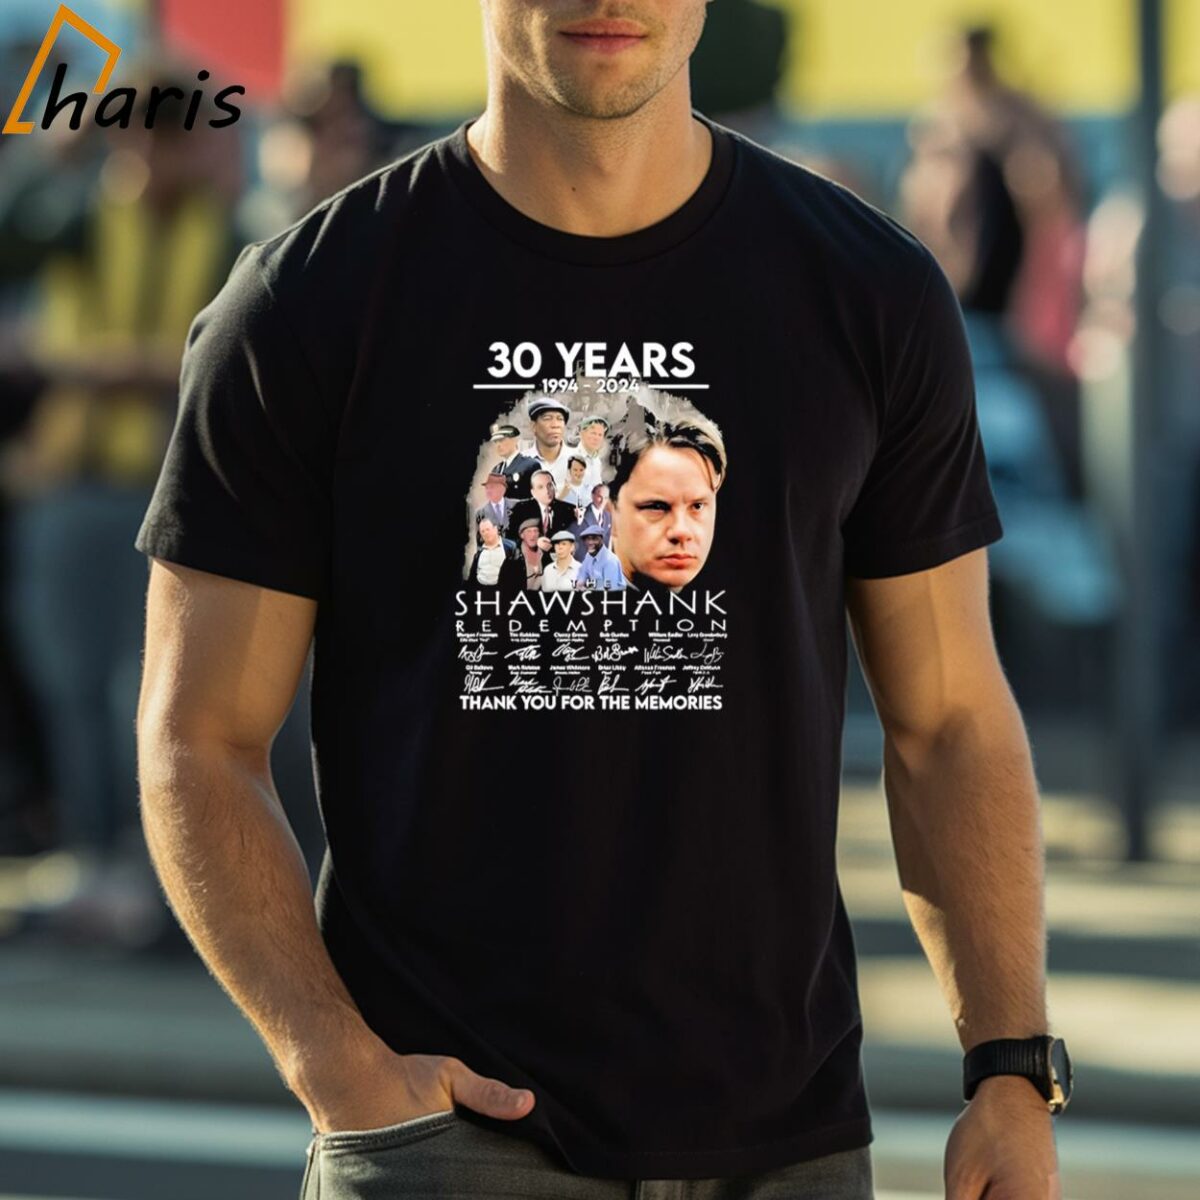 30 Years 1994 2024 The Shawshank Redemption Members Thank You For The Memories T Shirt 1 Shirt